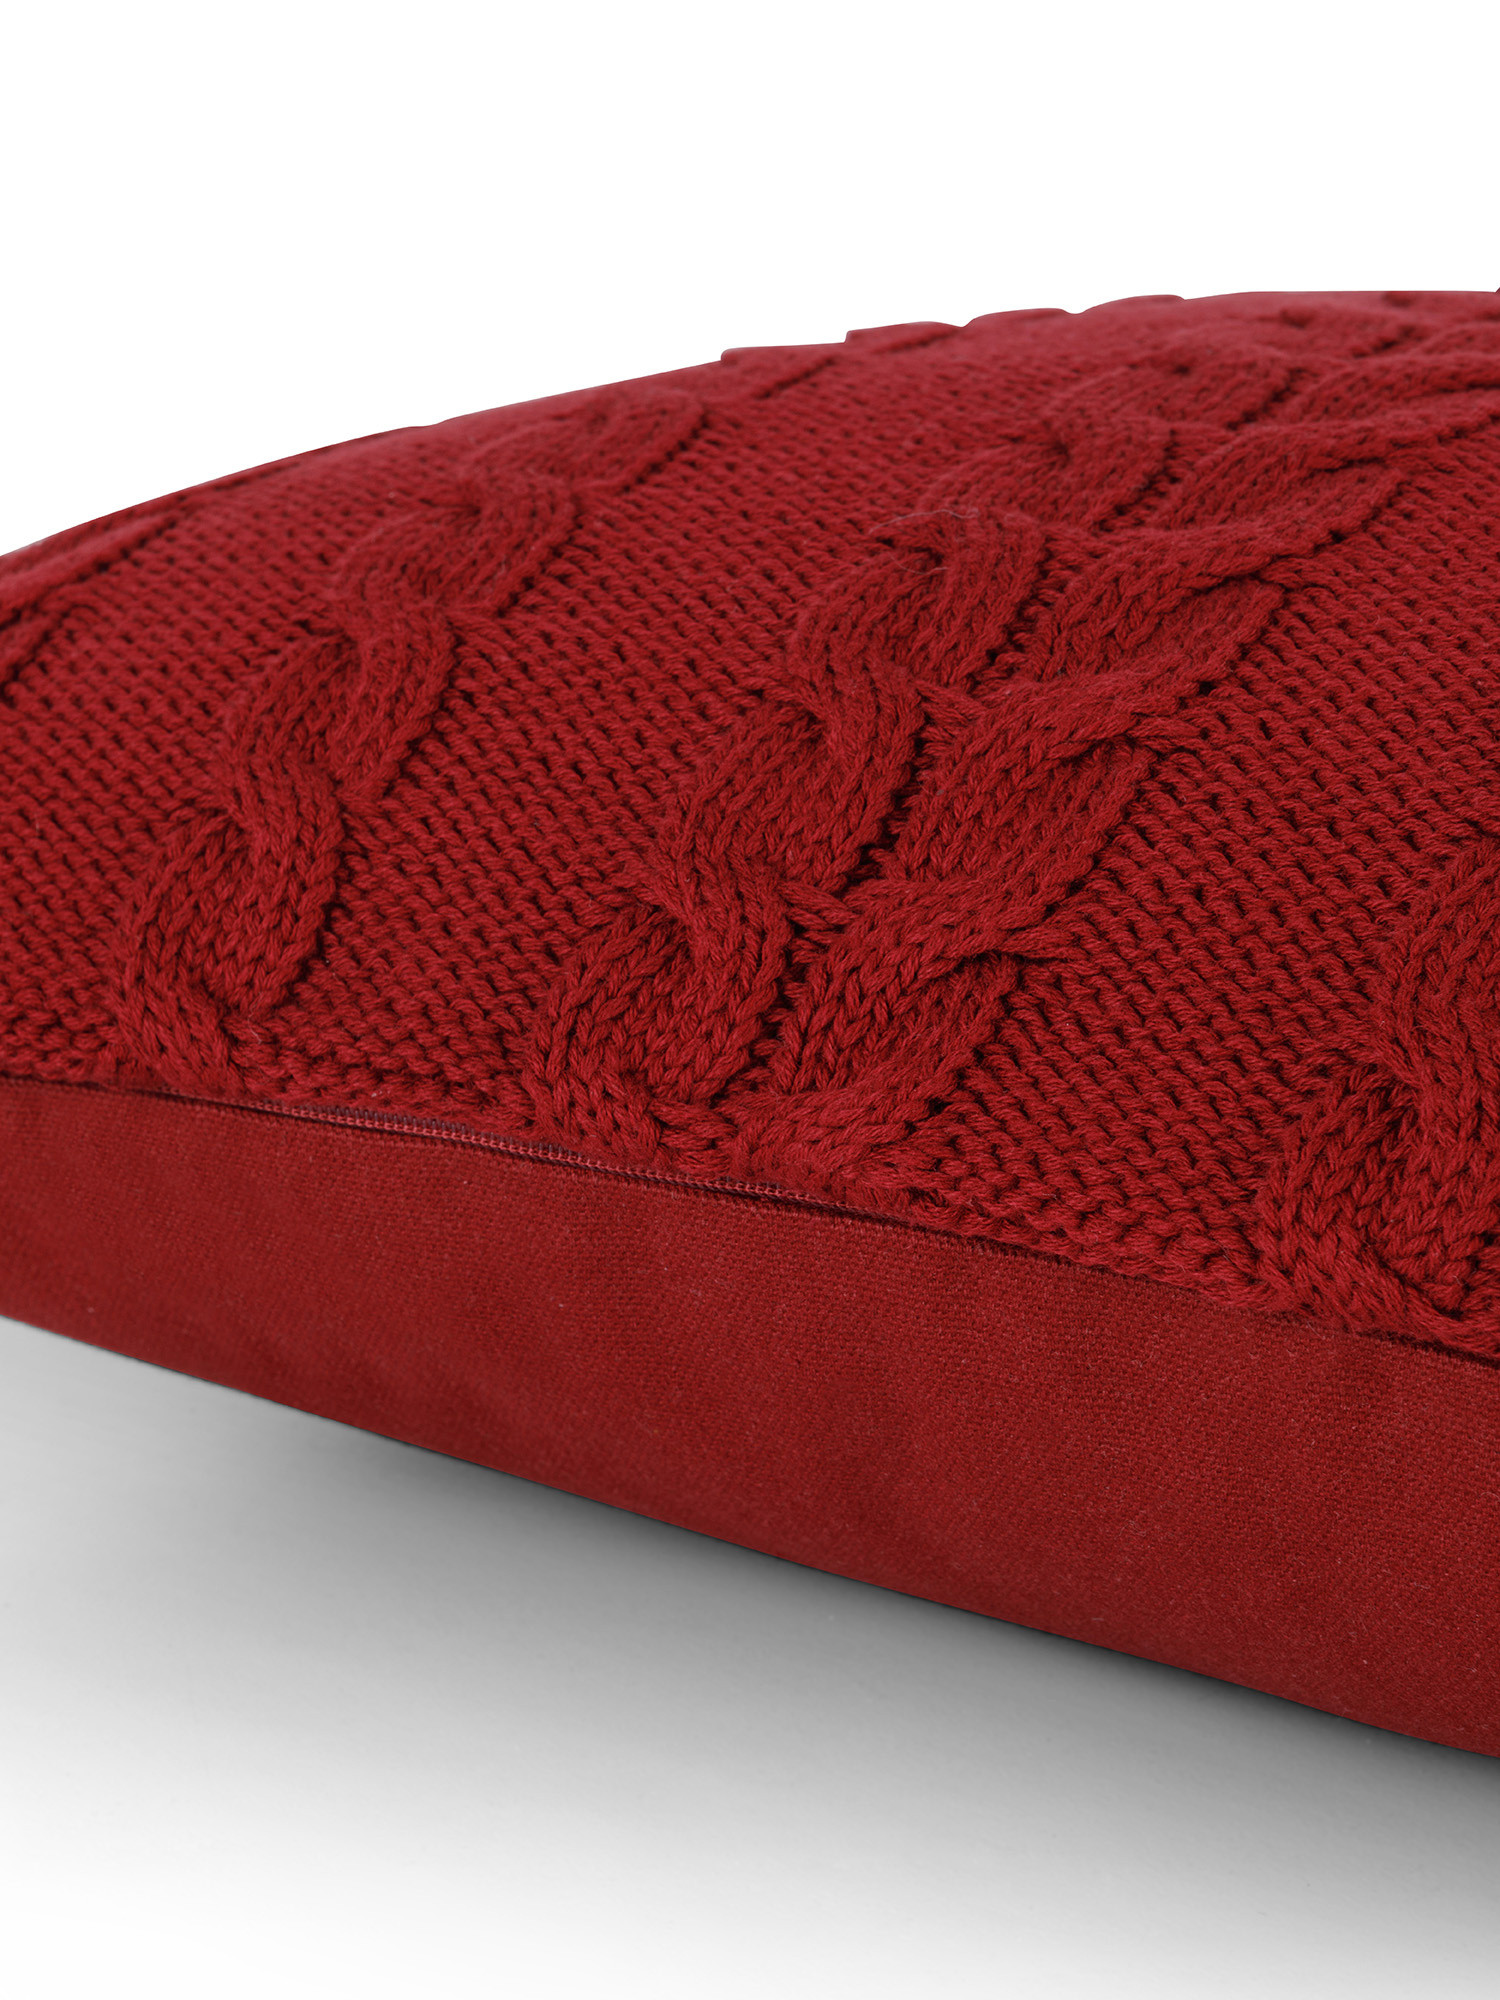 Knitted cushion with braid motif 45x45 cm, Red, large image number 2